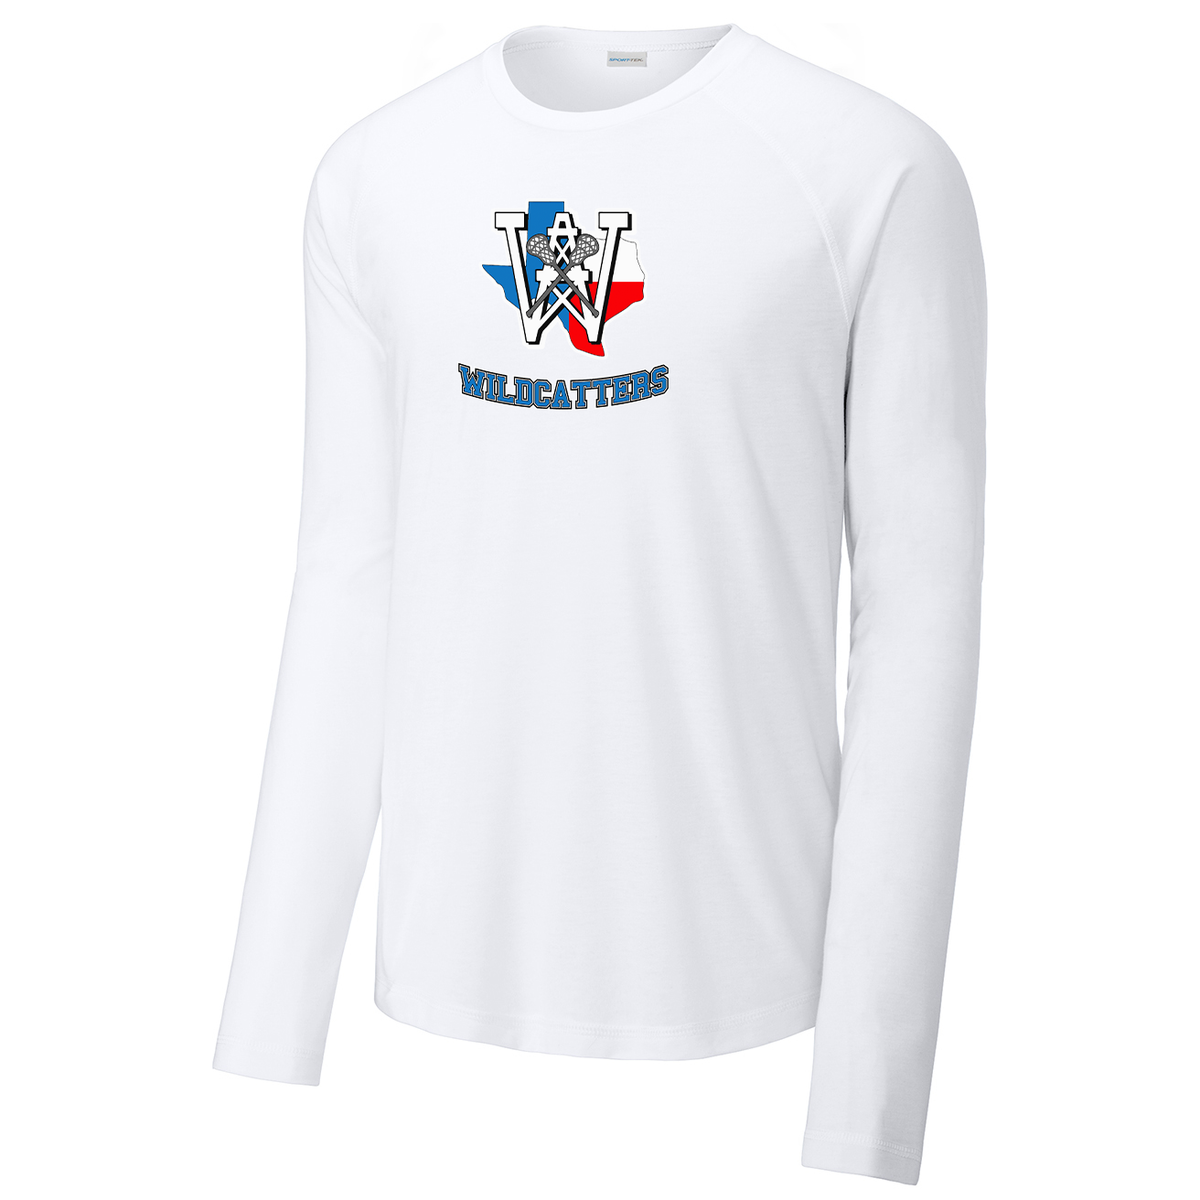 Wildcatters Lax Long Sleeve Raglan CottonTouch